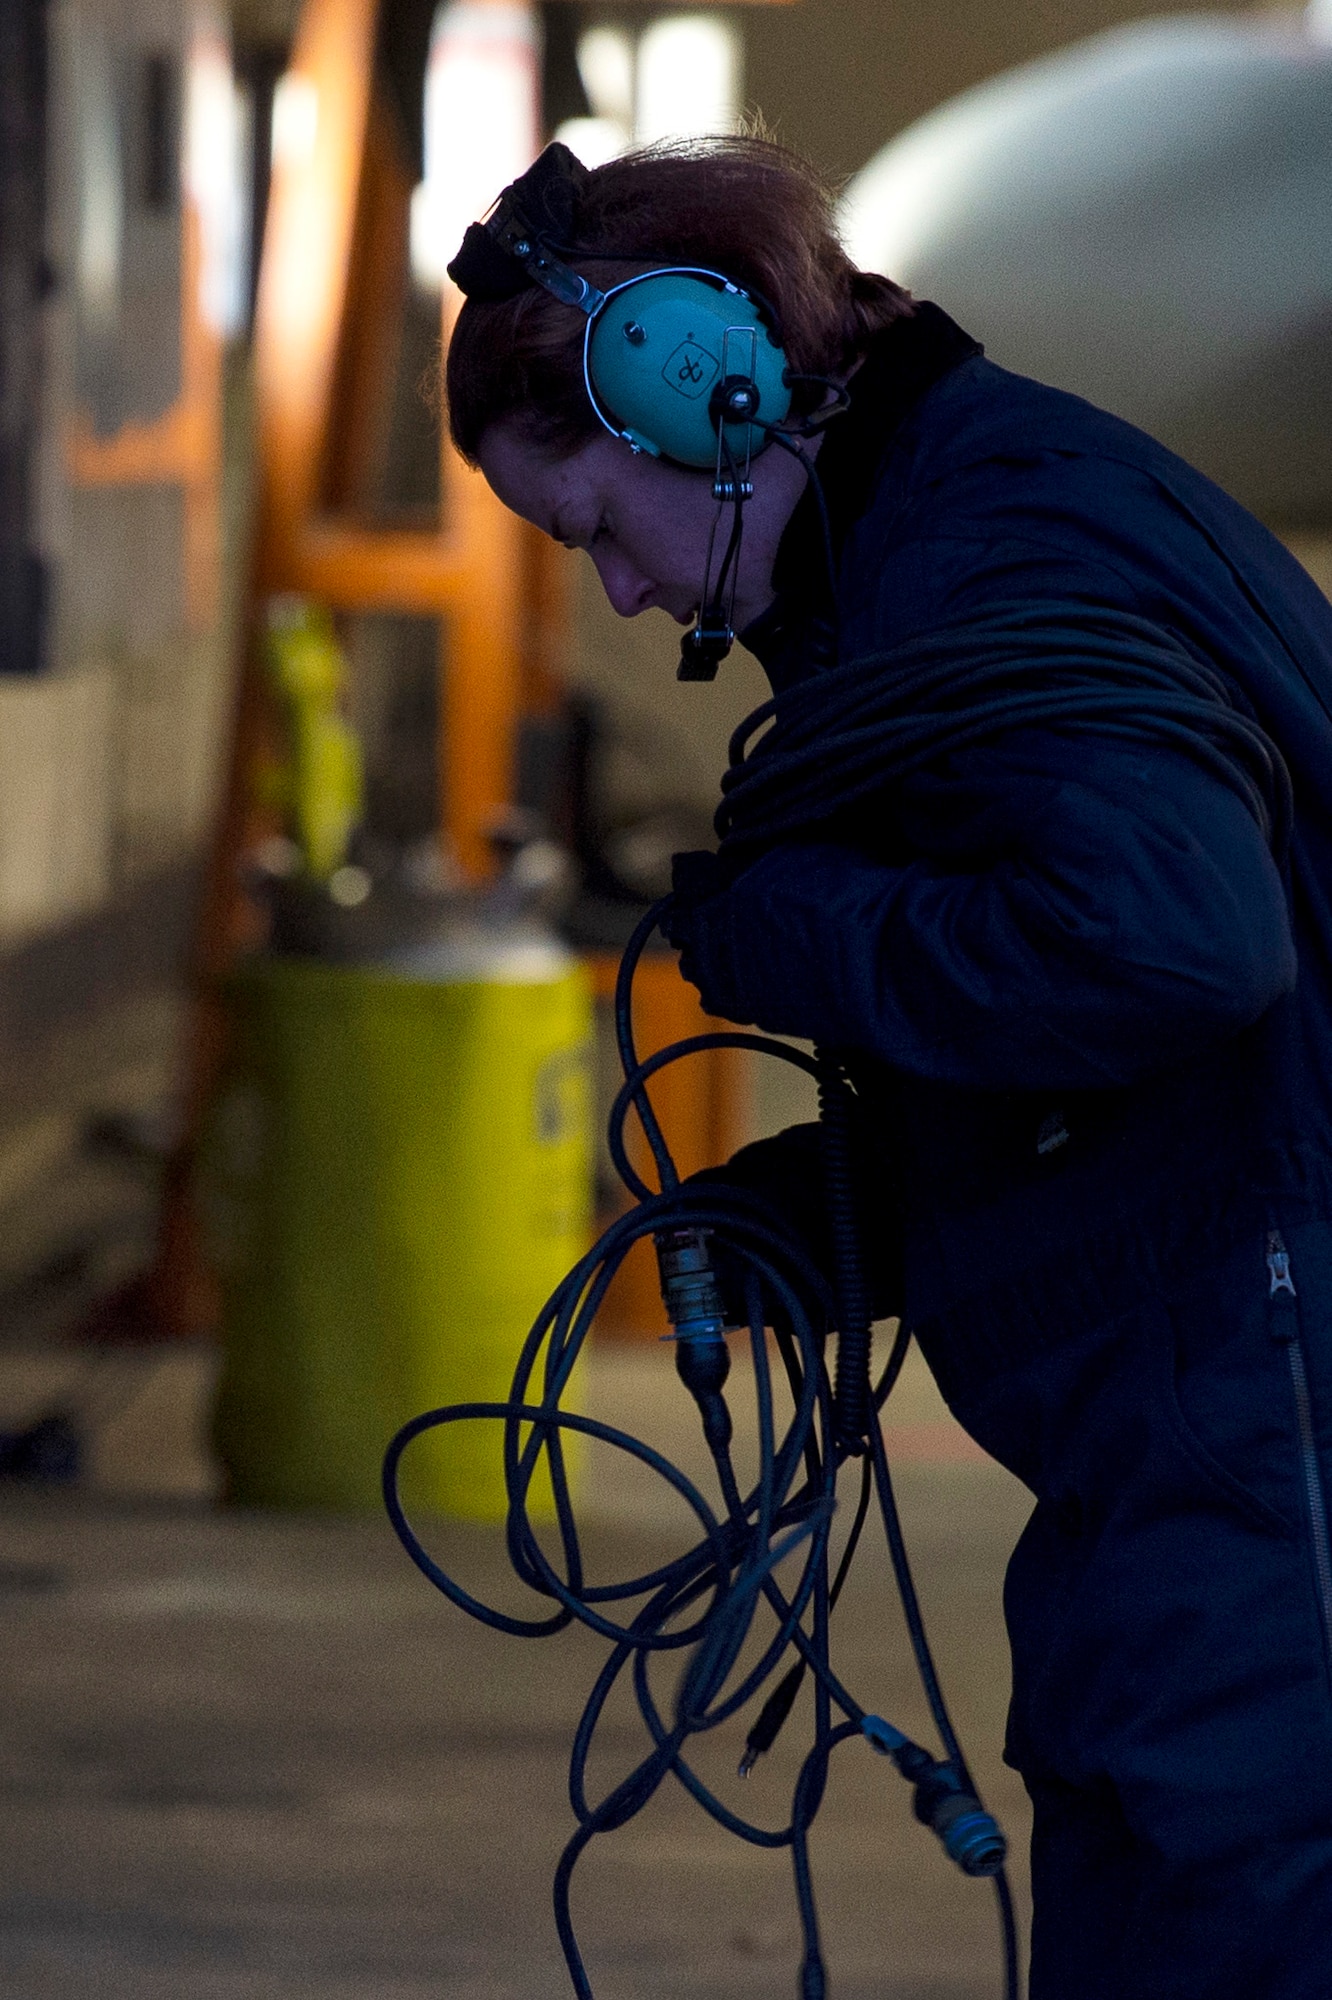 U.S. Air Force Staff Sgt. Stephanie Gillie, 52nd Security Forces Squadron investigator, winds up a cable at Spangdahlem Air Base, Germany, April 3, 2019. Gillie worked on the flightline as part of the 52nd Aircraft Maintenance Squadron Crew Chief for a Day program. Gillie observed and helped with the launch and recovery of aircraft, inspections, and learned how maintainers interact with pilots. The new, weekly program is designed to give Airmen an understanding of flightline operations. (U.S. Air Force photo by Airman 1st Class Valerie Seelye)